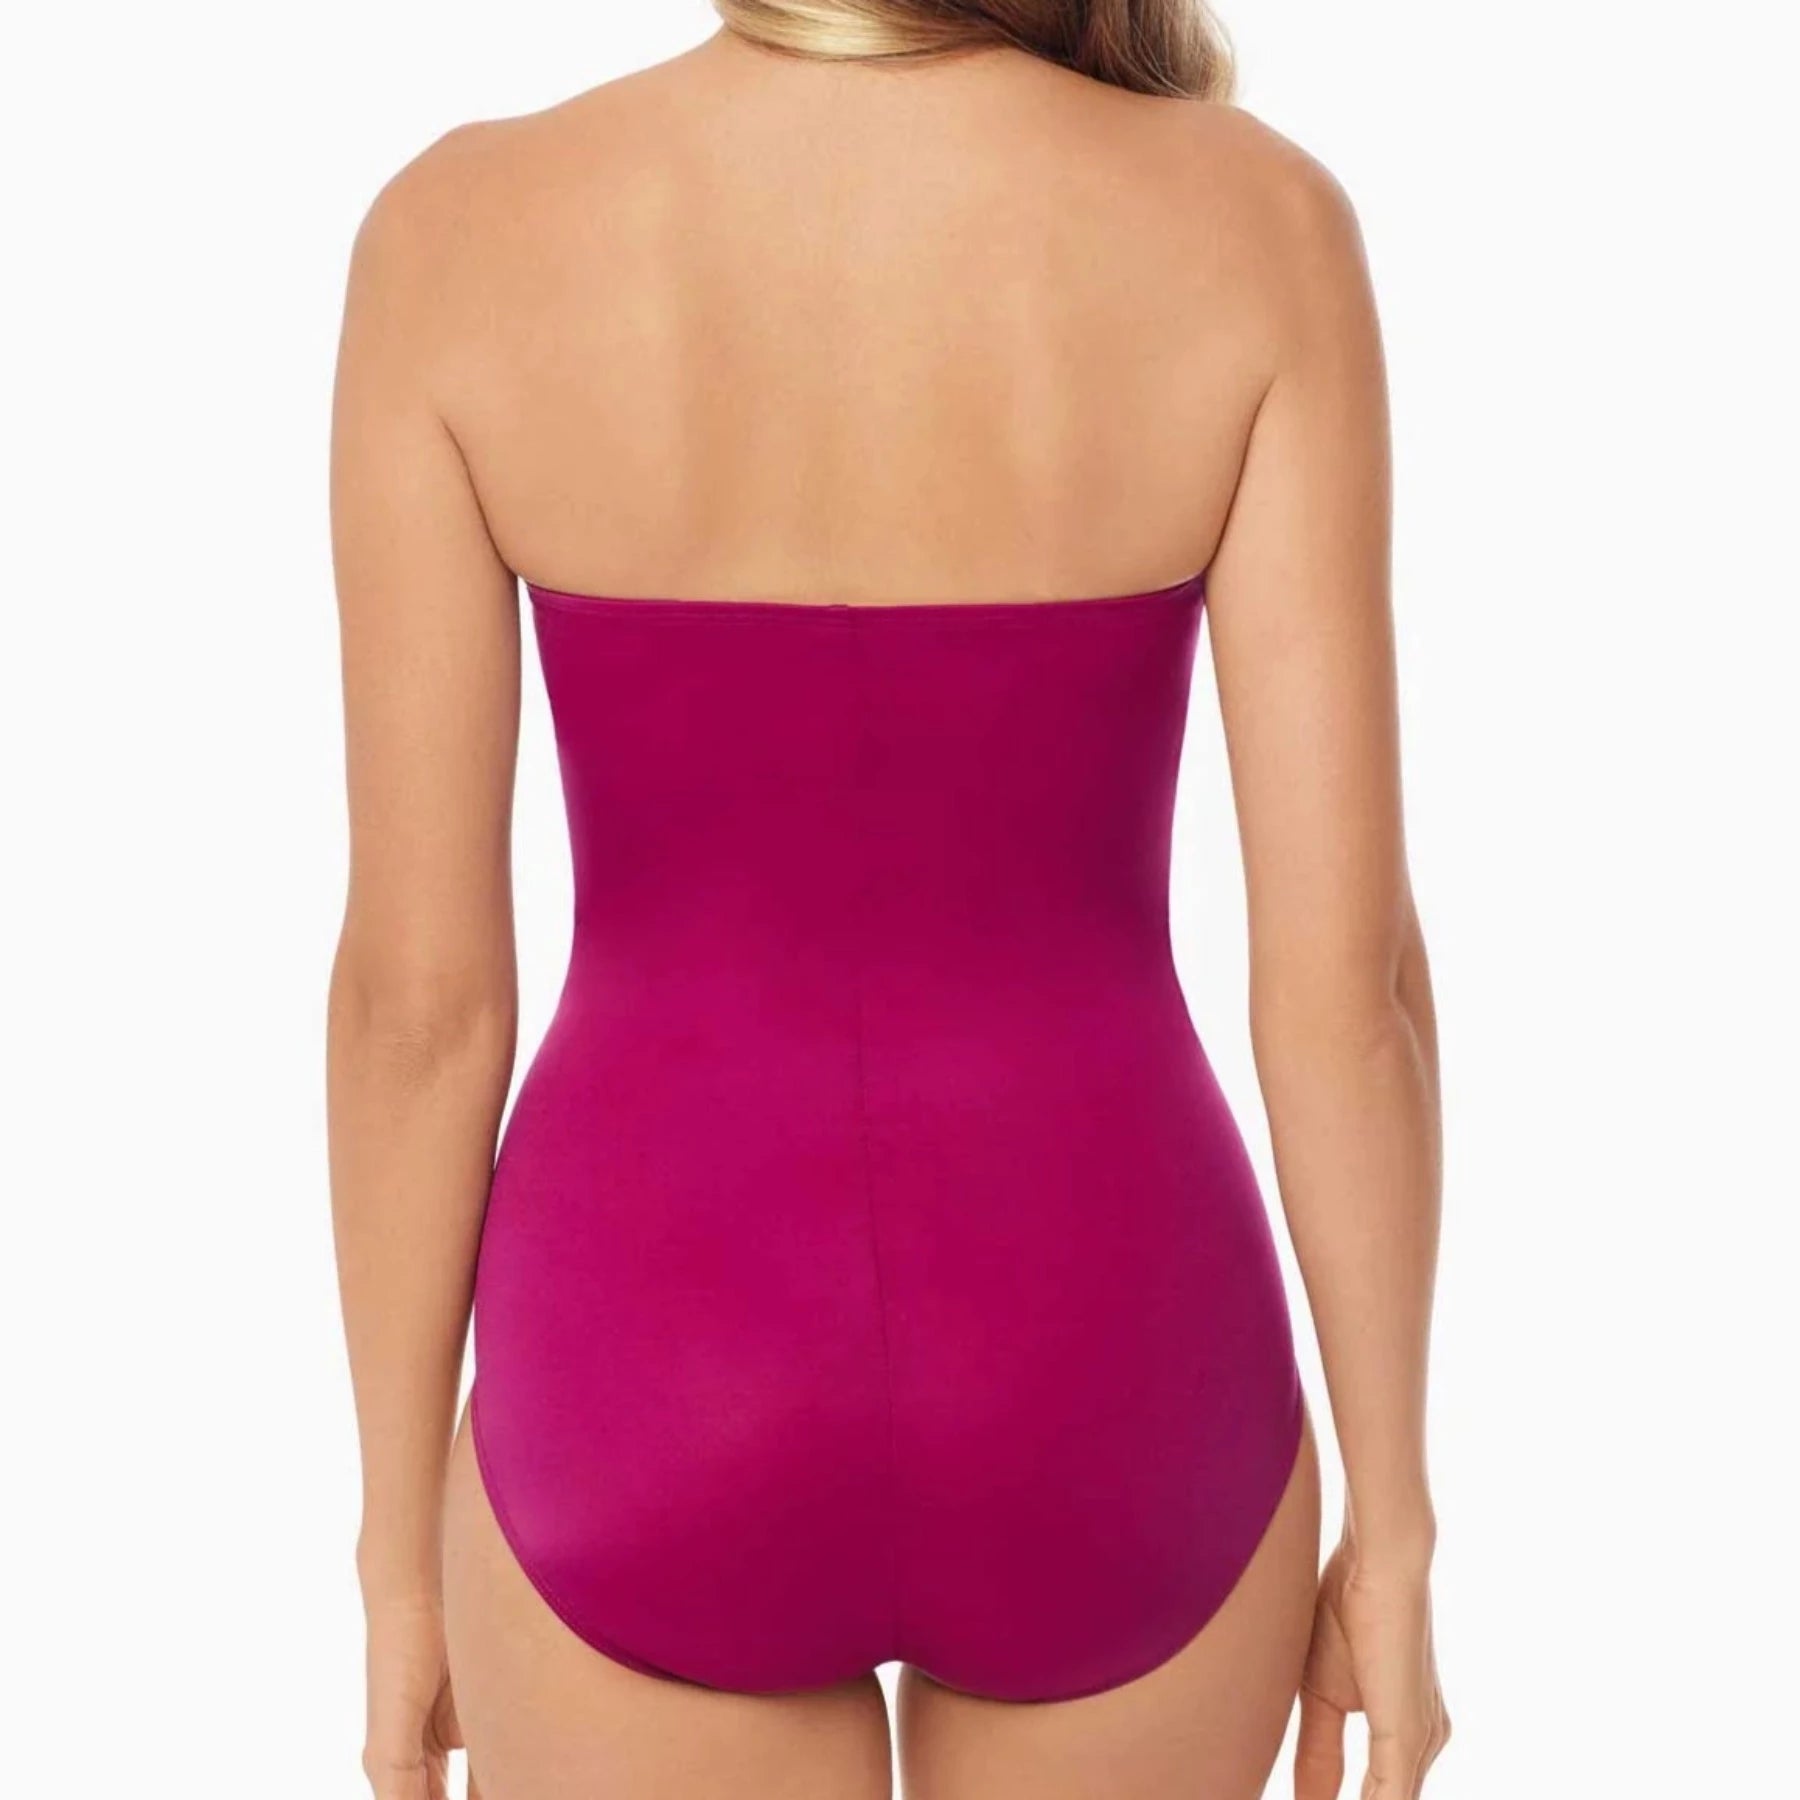 Rock Solid Madrid Bandeau One Piece Swimsuit 6516657 - Framboise Pink